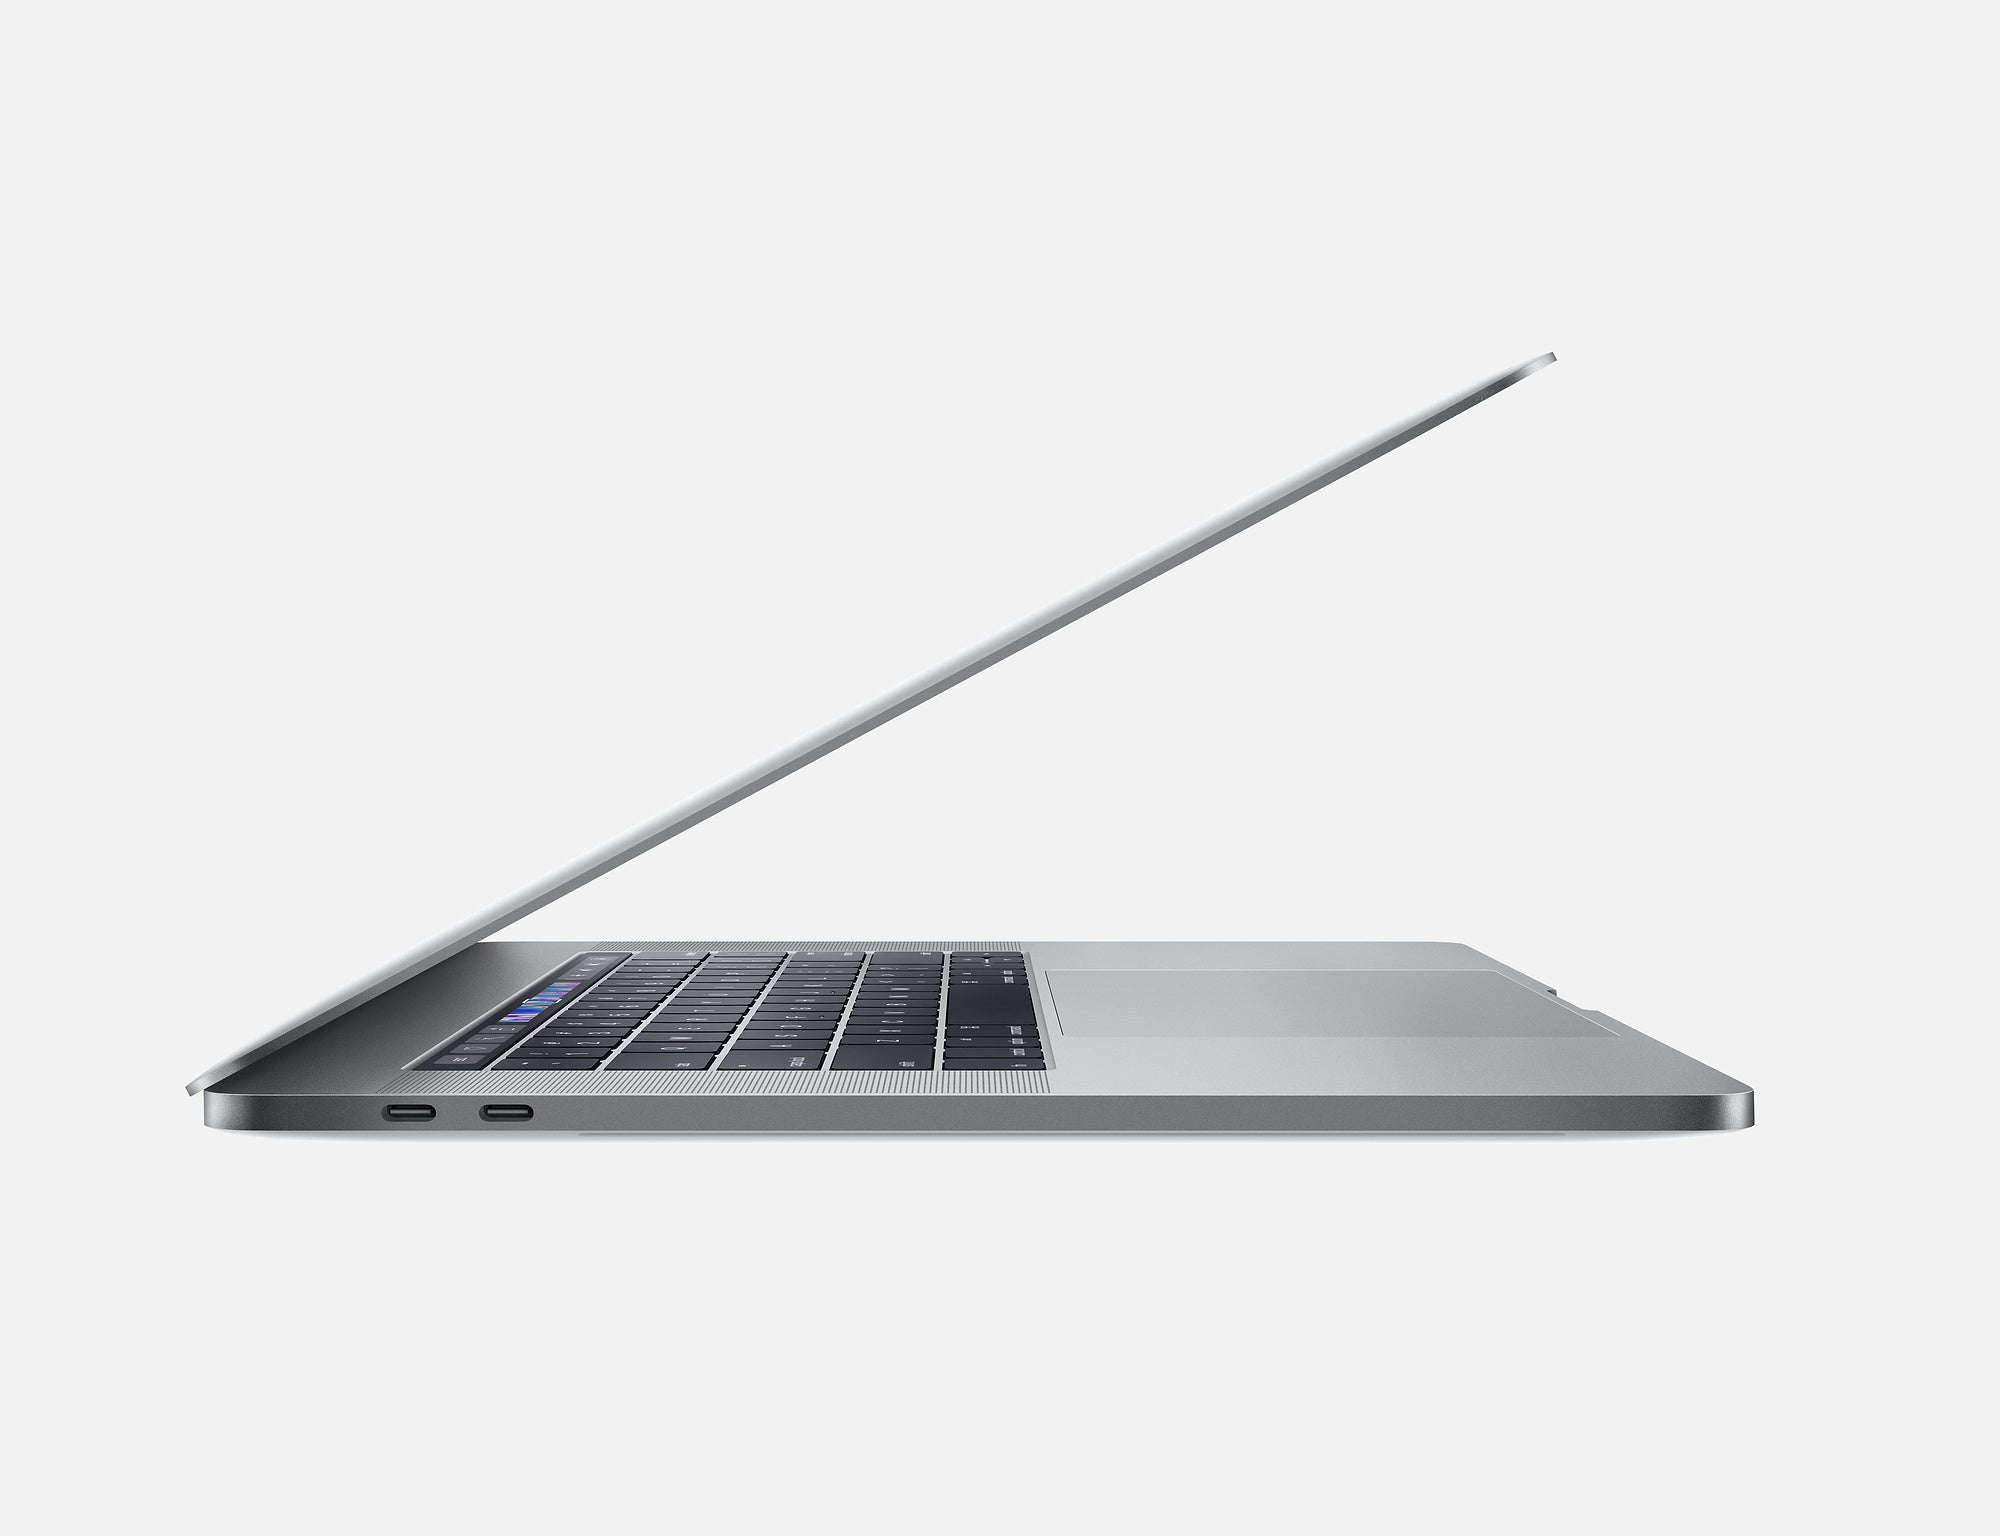 Apple MacBook Pro 15-Inch A1990 Touch Bar i7 8750H 6 Cores Up to 4.1Ghz 16GB 256GB NVMe 4GB AMD 555X VGA Space Grey